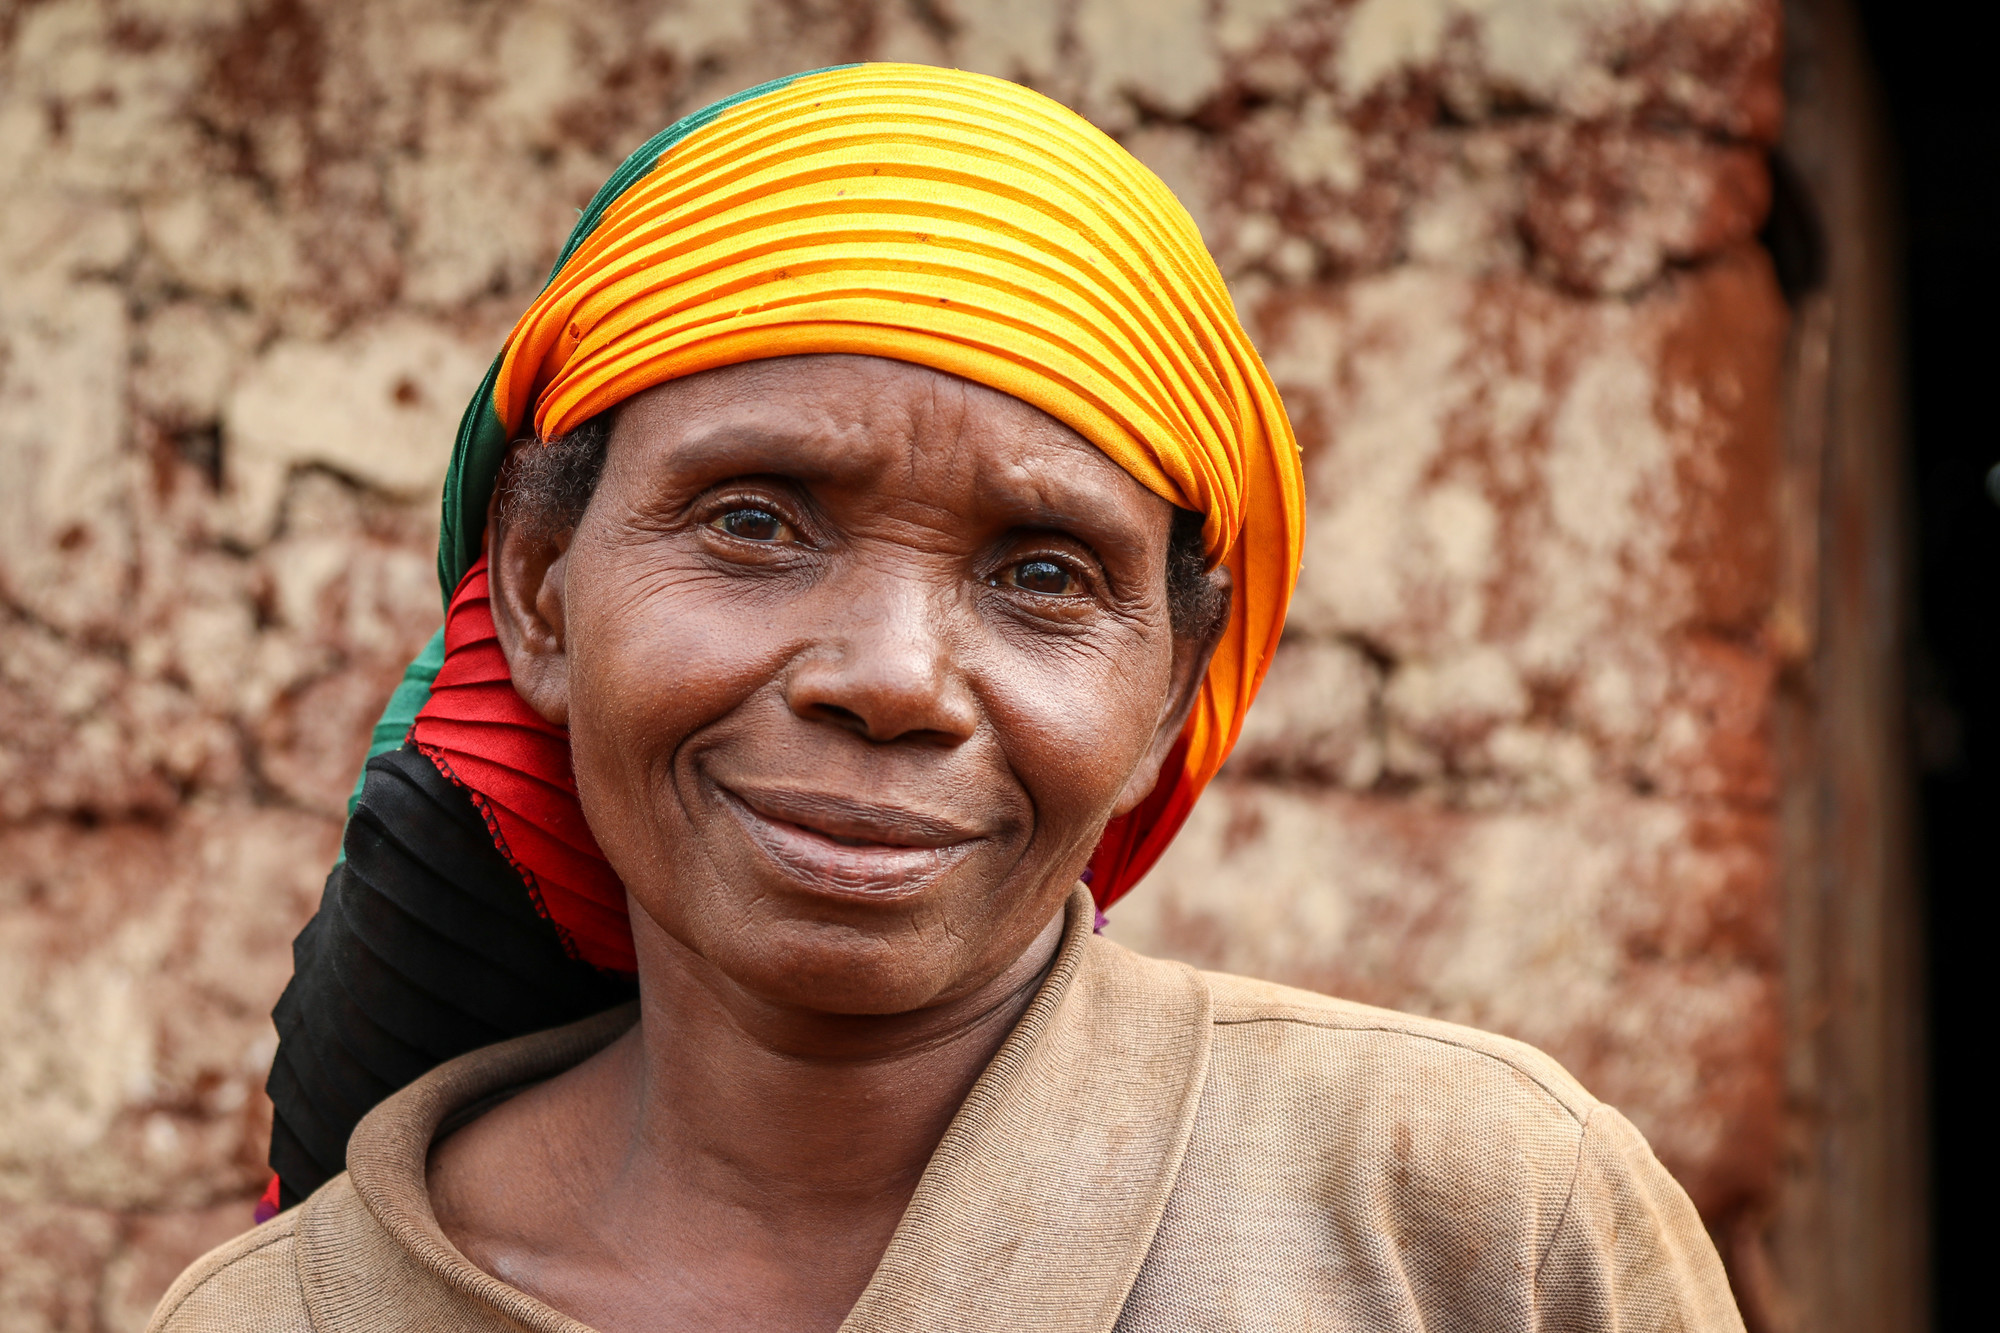 A portrait of a Burundi woman with a colorful scarf around her head